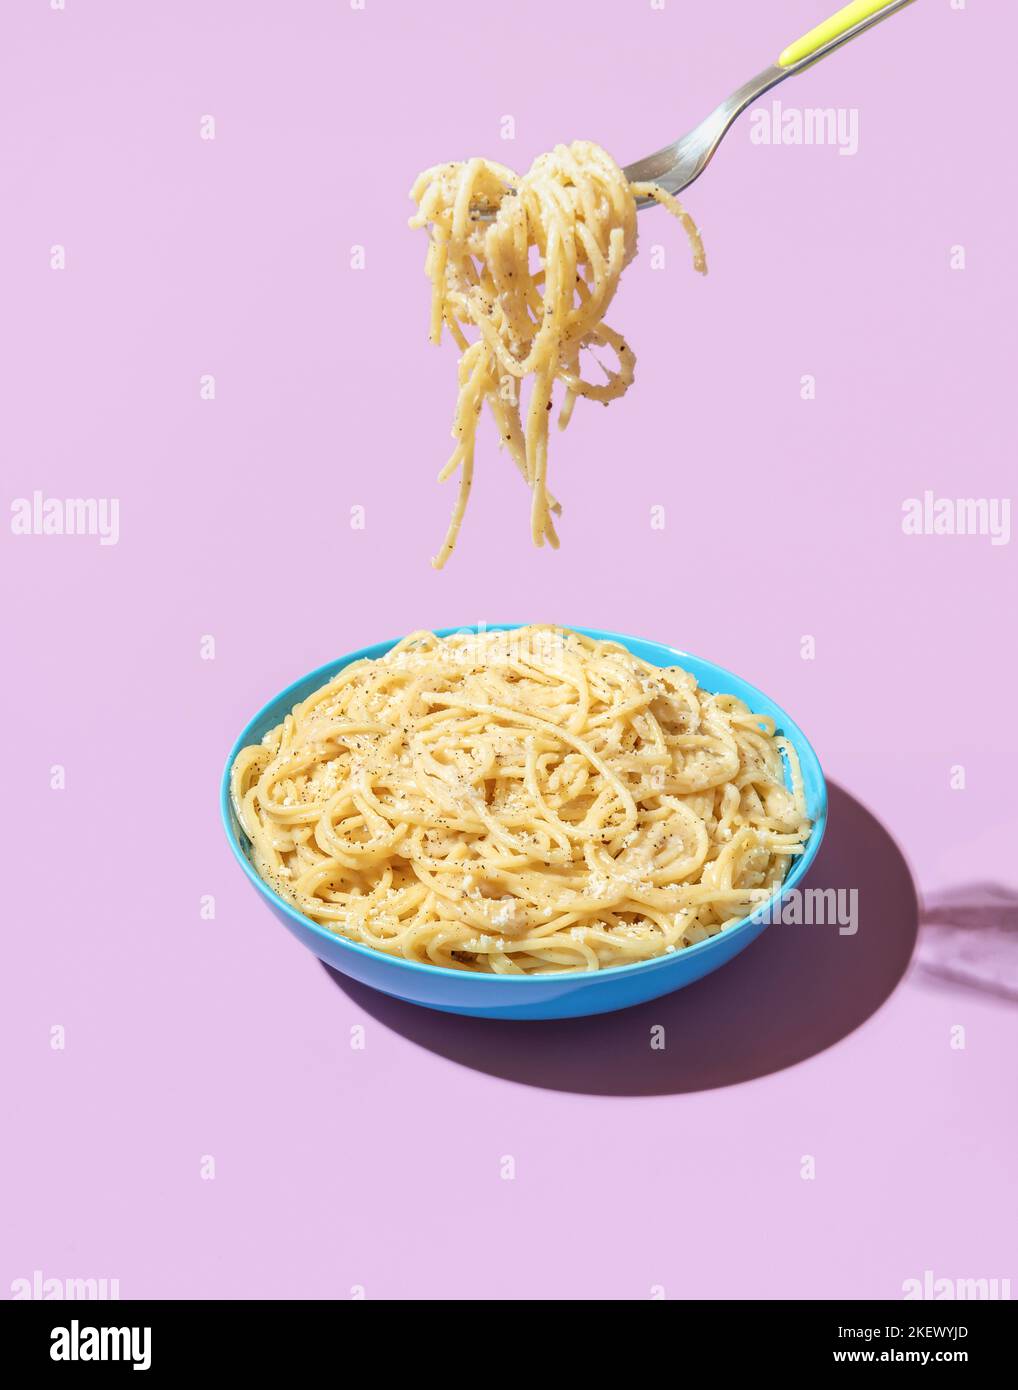 Pasta Cacio e Pepe in a blue bowl isolated on a purple background. Taking spaghetti with a fork from a bowl in bright light against a colorful backgro Stock Photo